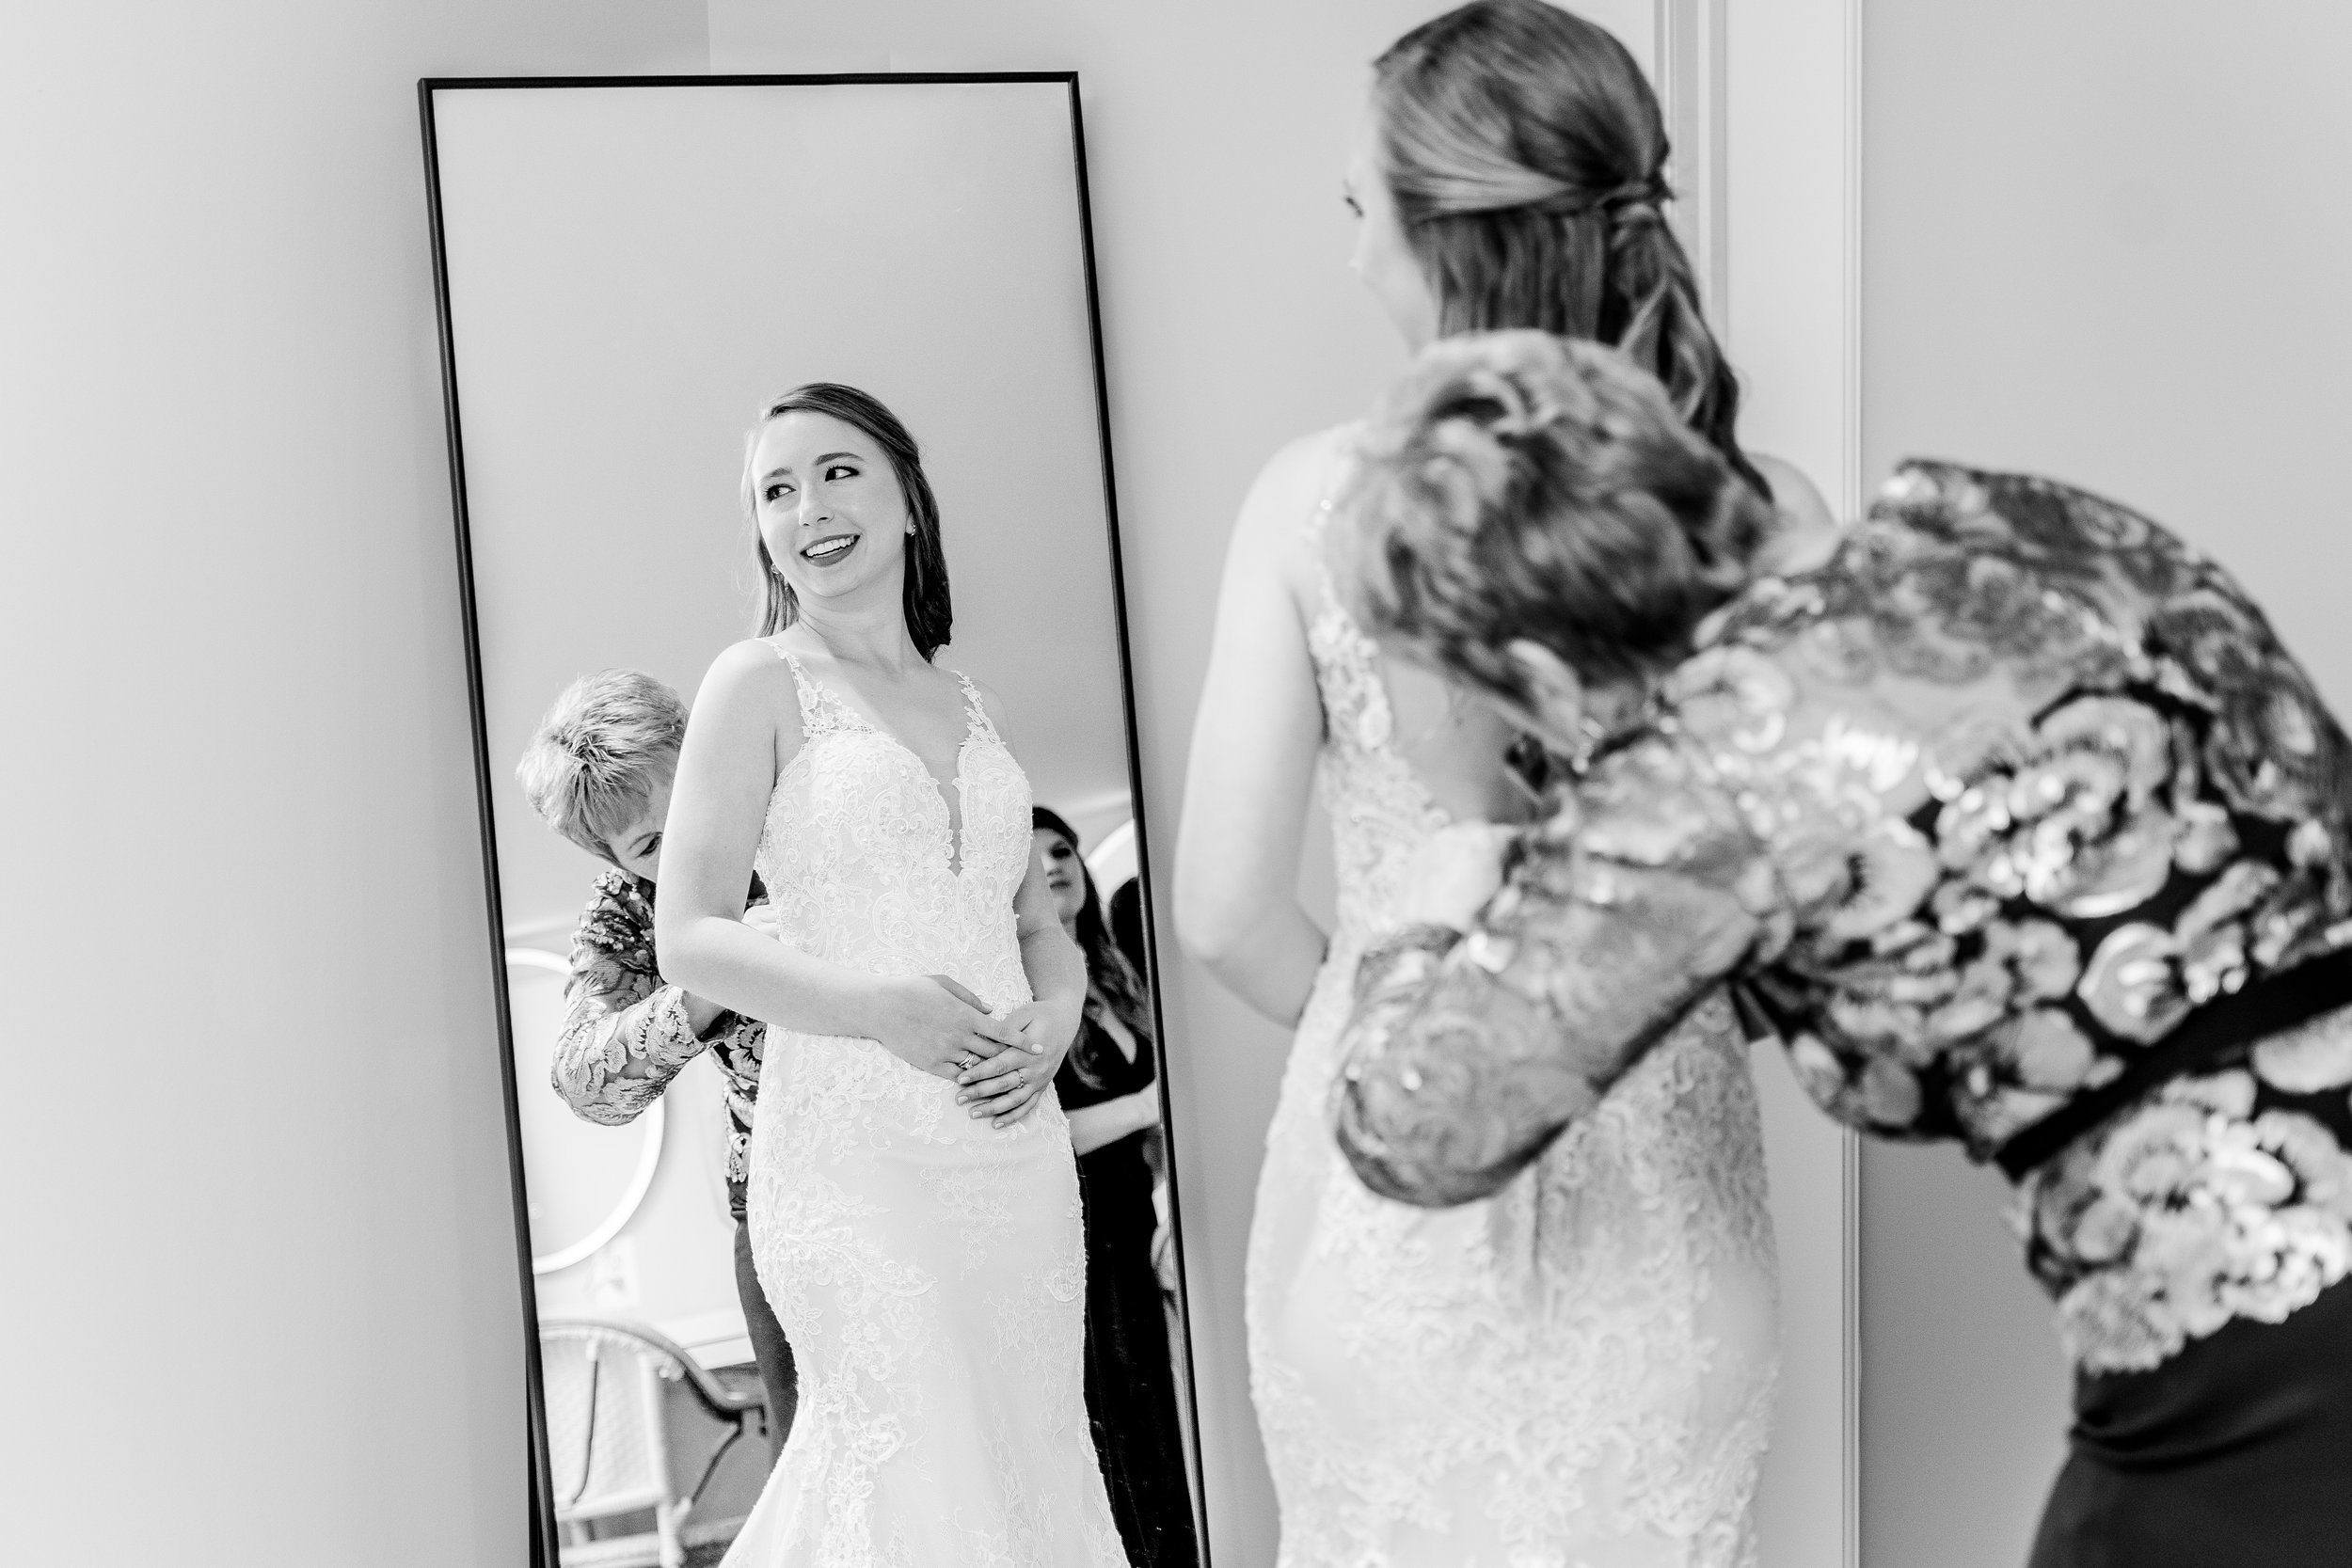 A bride looking in the mirror while getting ready for her wedding at Fleetwood Farm Winery in Loudoun County Virginia